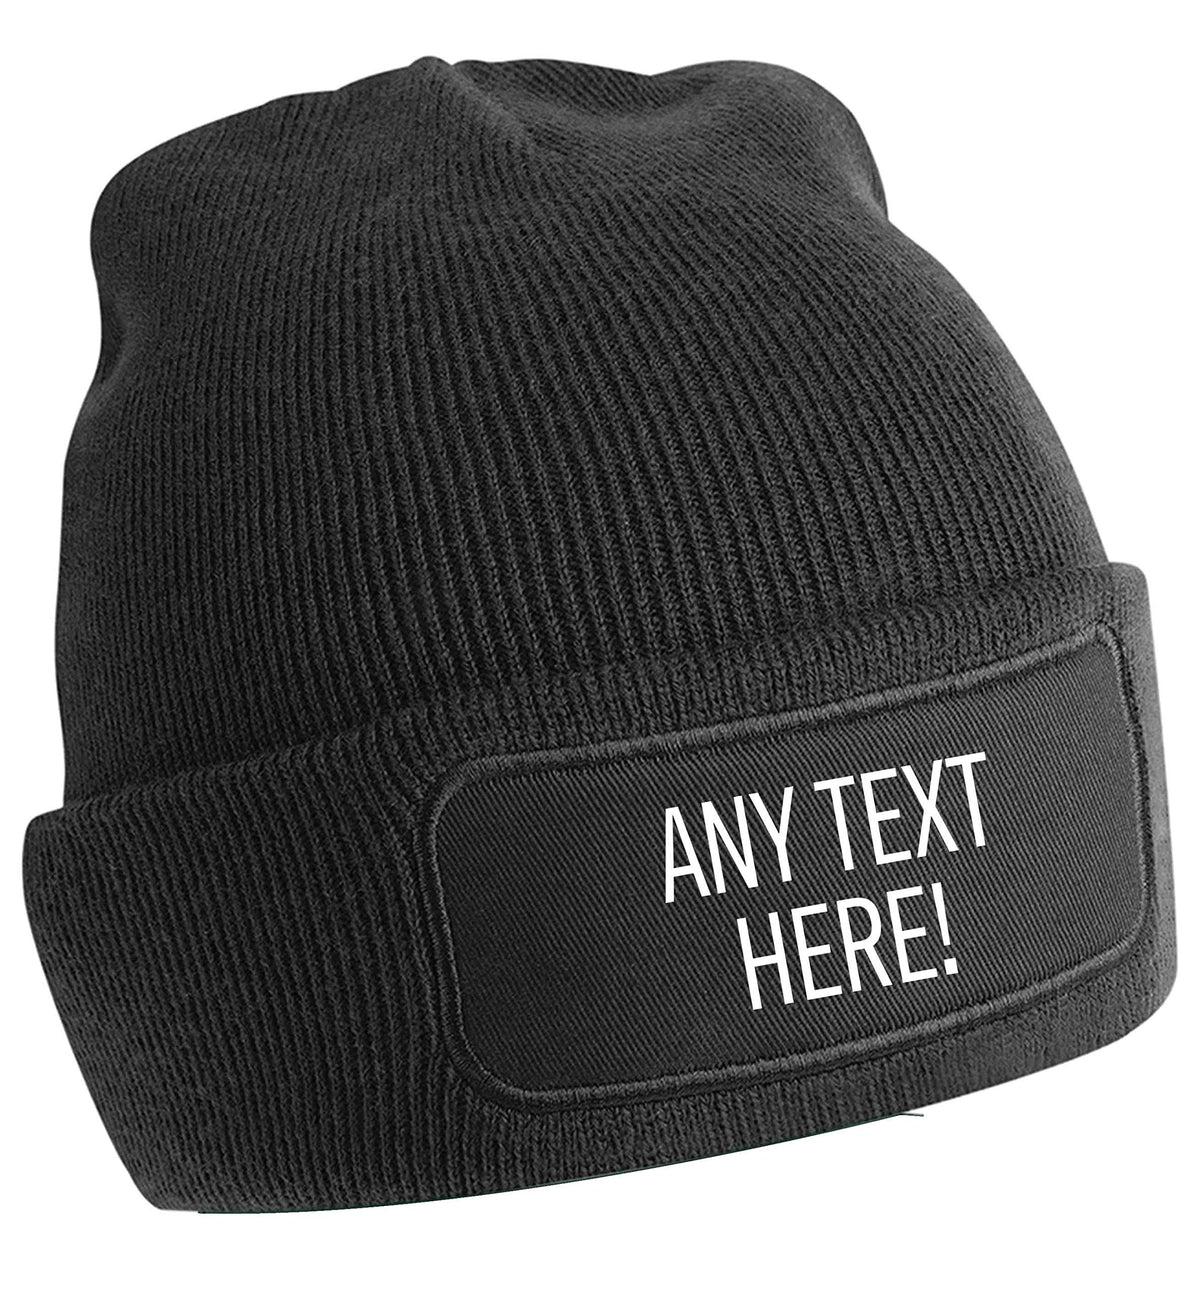 Flox Creative Adults Beanie Hat in Black Any Text Here